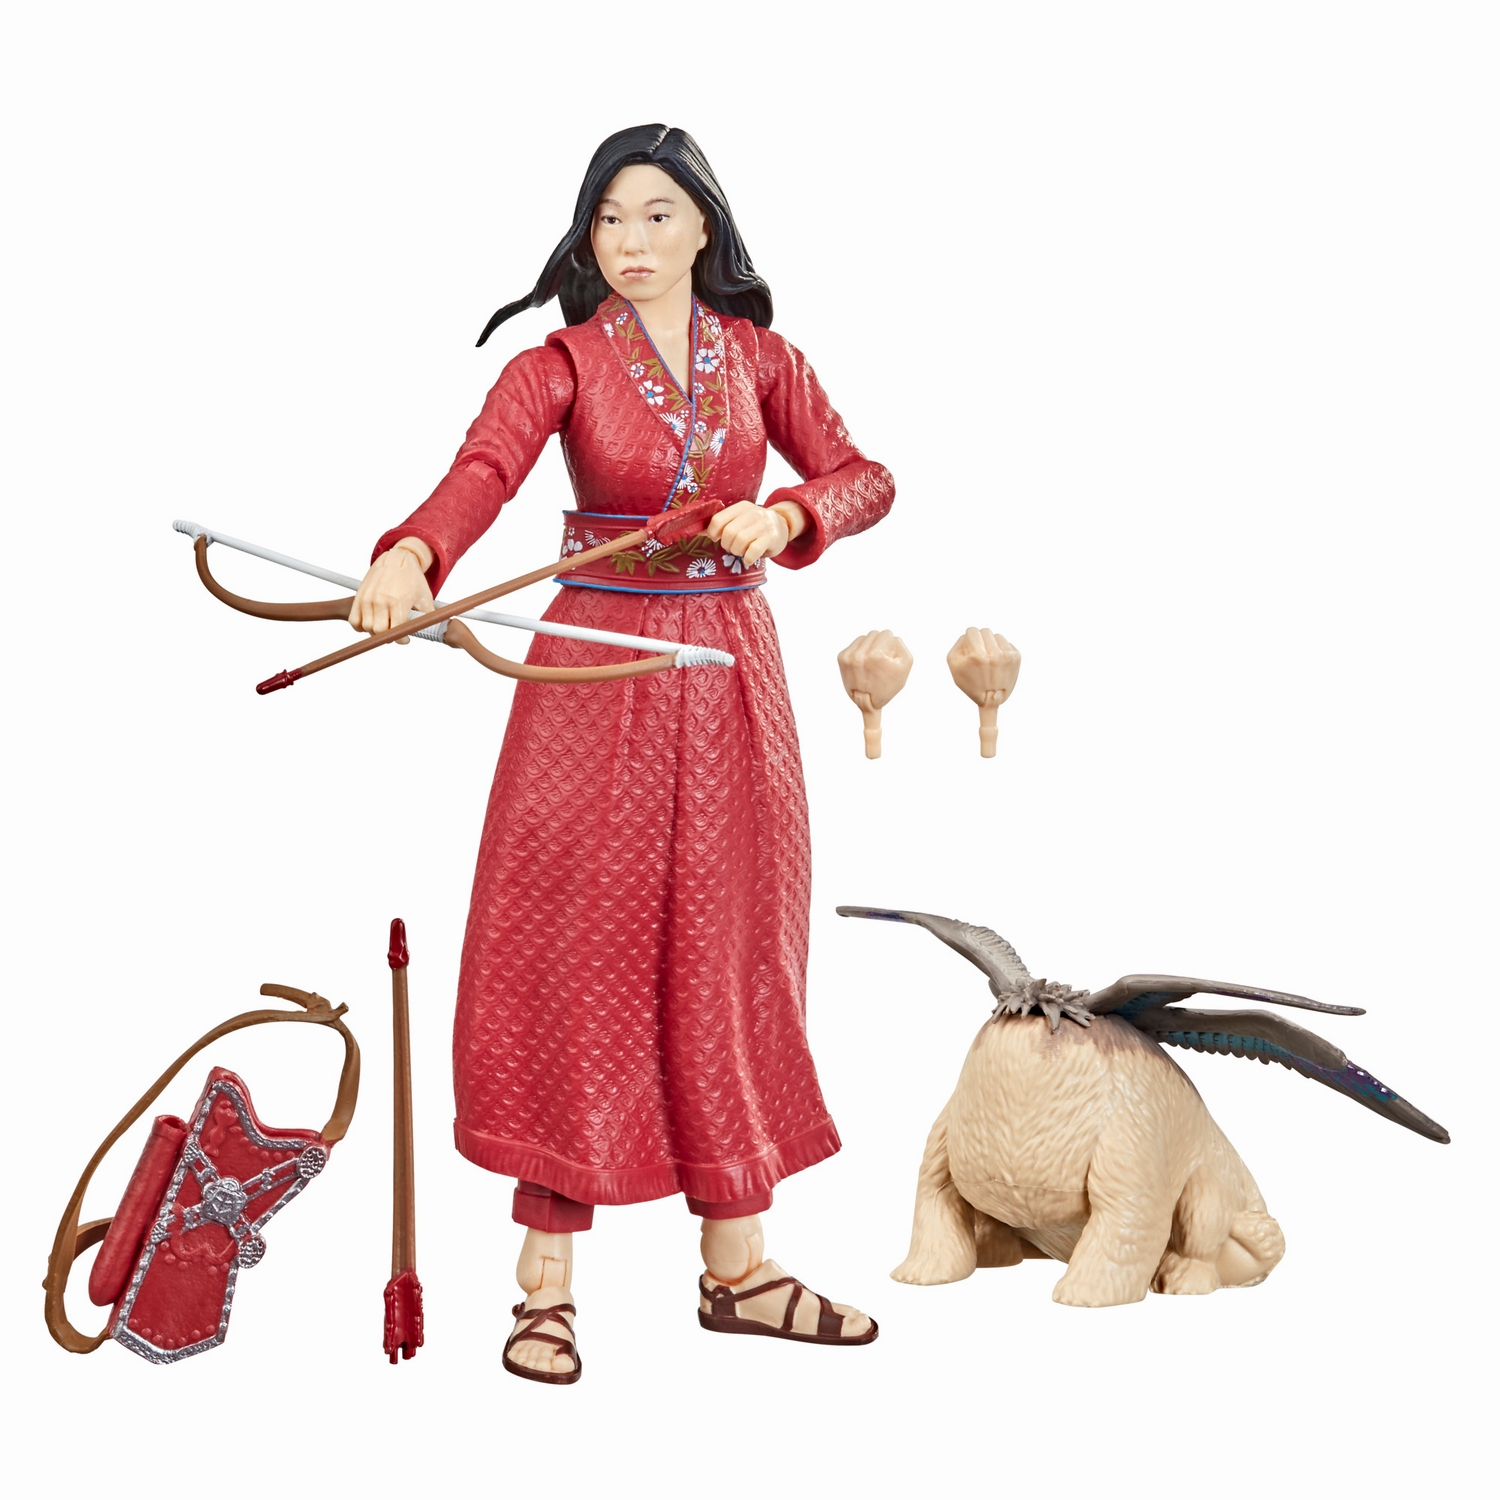 MARVEL LEGENDS SERIES 6-INCH SHANG-CHI AND THE LEGEND OF THE TEN RINGS MARVEL’S KATY -4.jpg